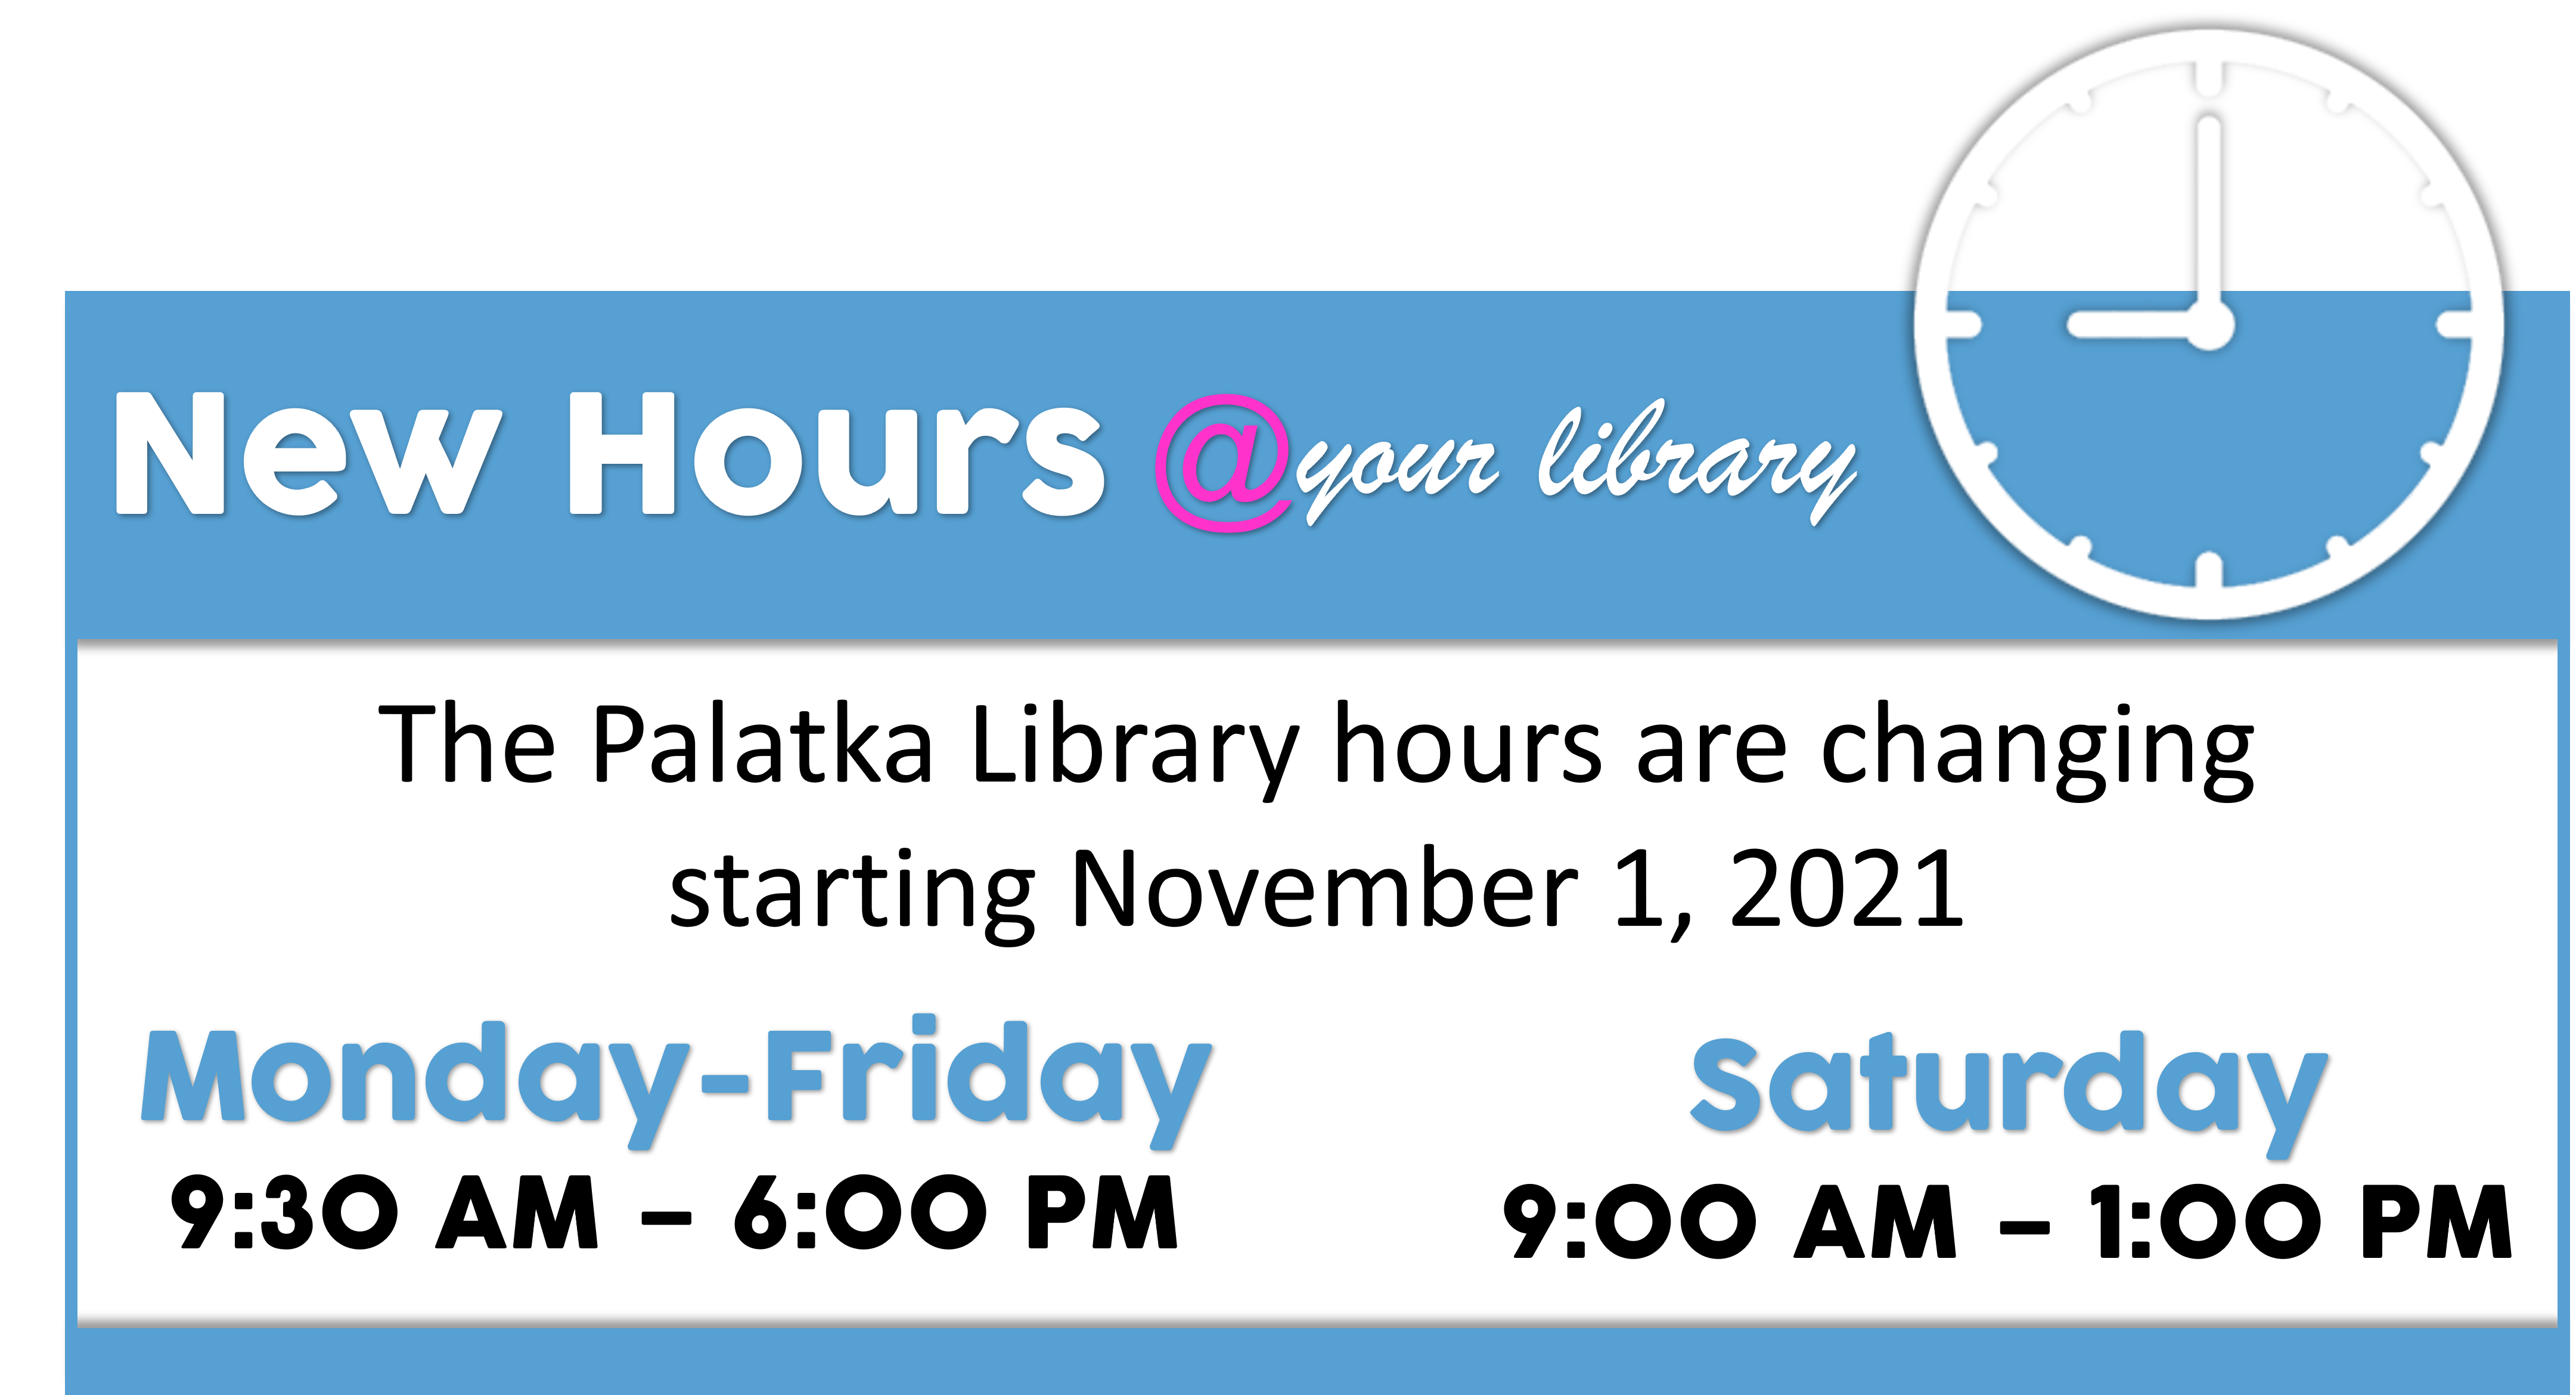 The Palatka Library's hours are changing.  The new hours will be 9:30-6:00 Monday through Friday, and 9:00-1:00 Saturday.